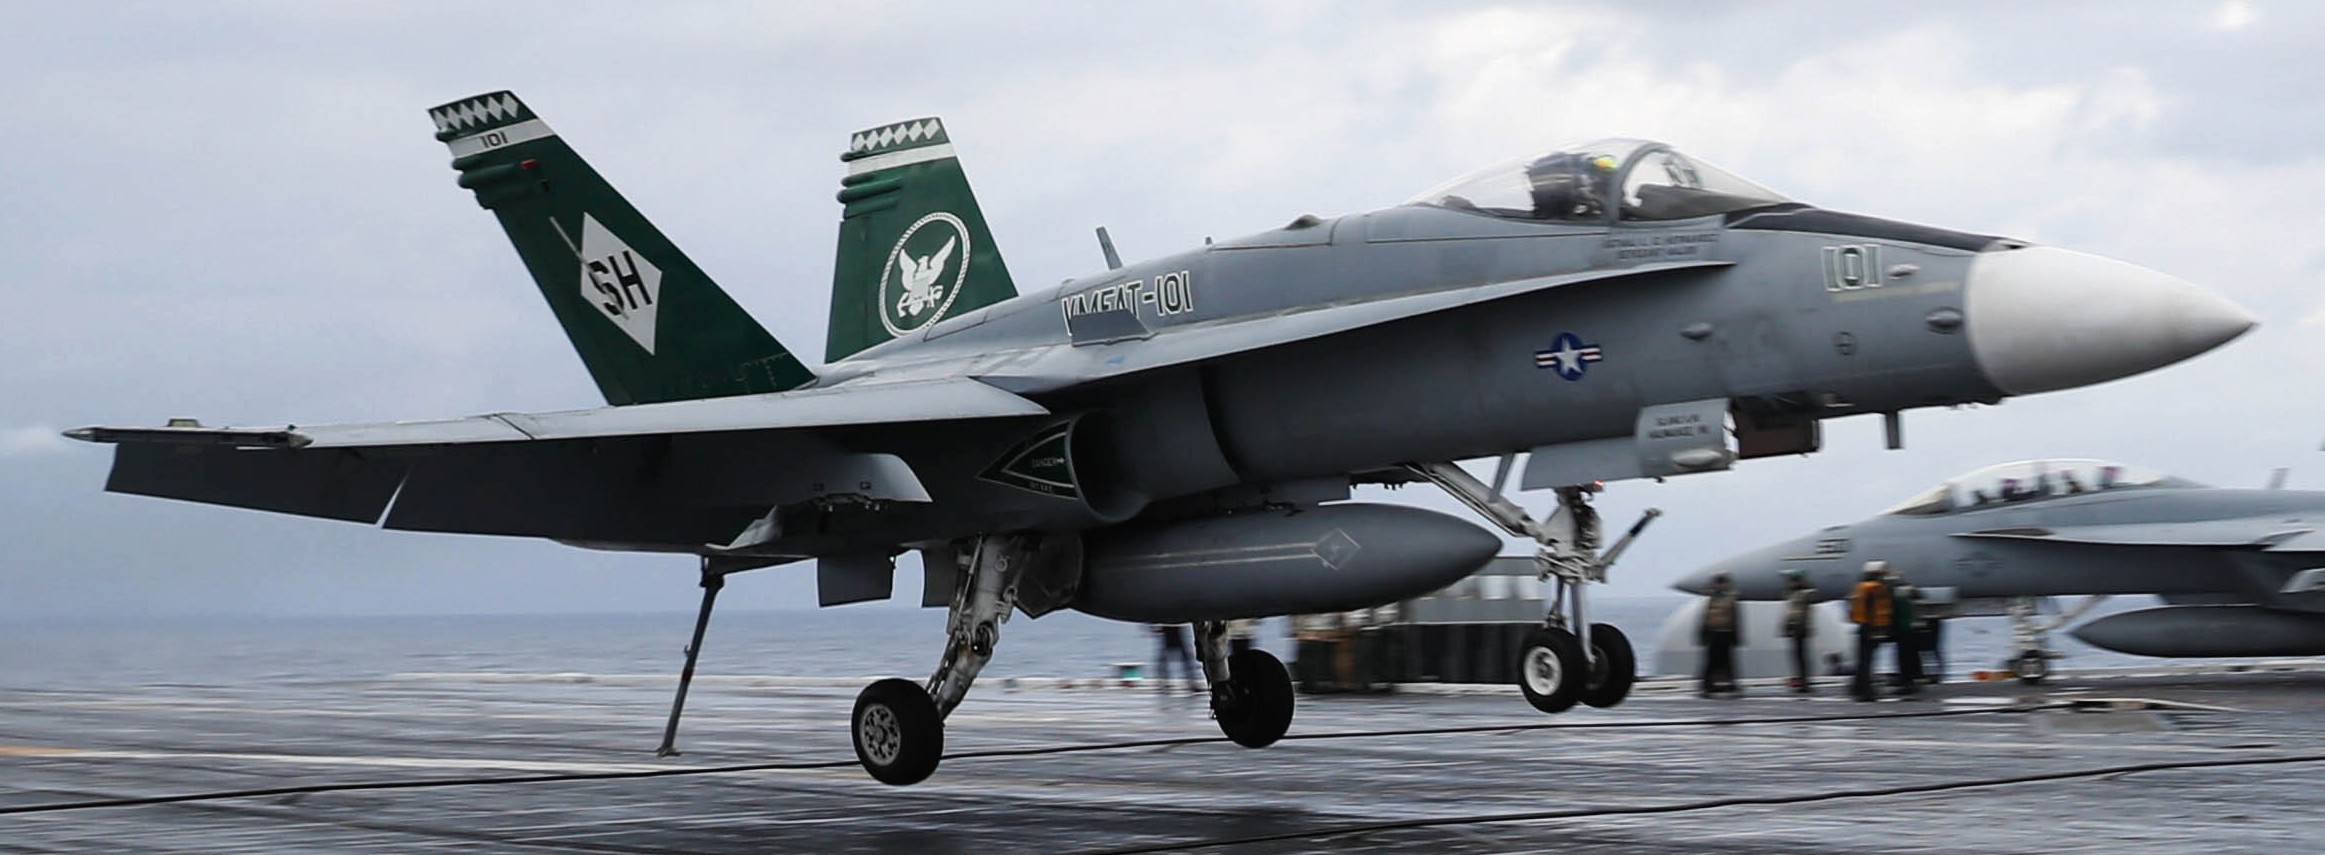 vmfat-101 sharpshooters marine fighter attack training squadron f/a-18c hornet 08